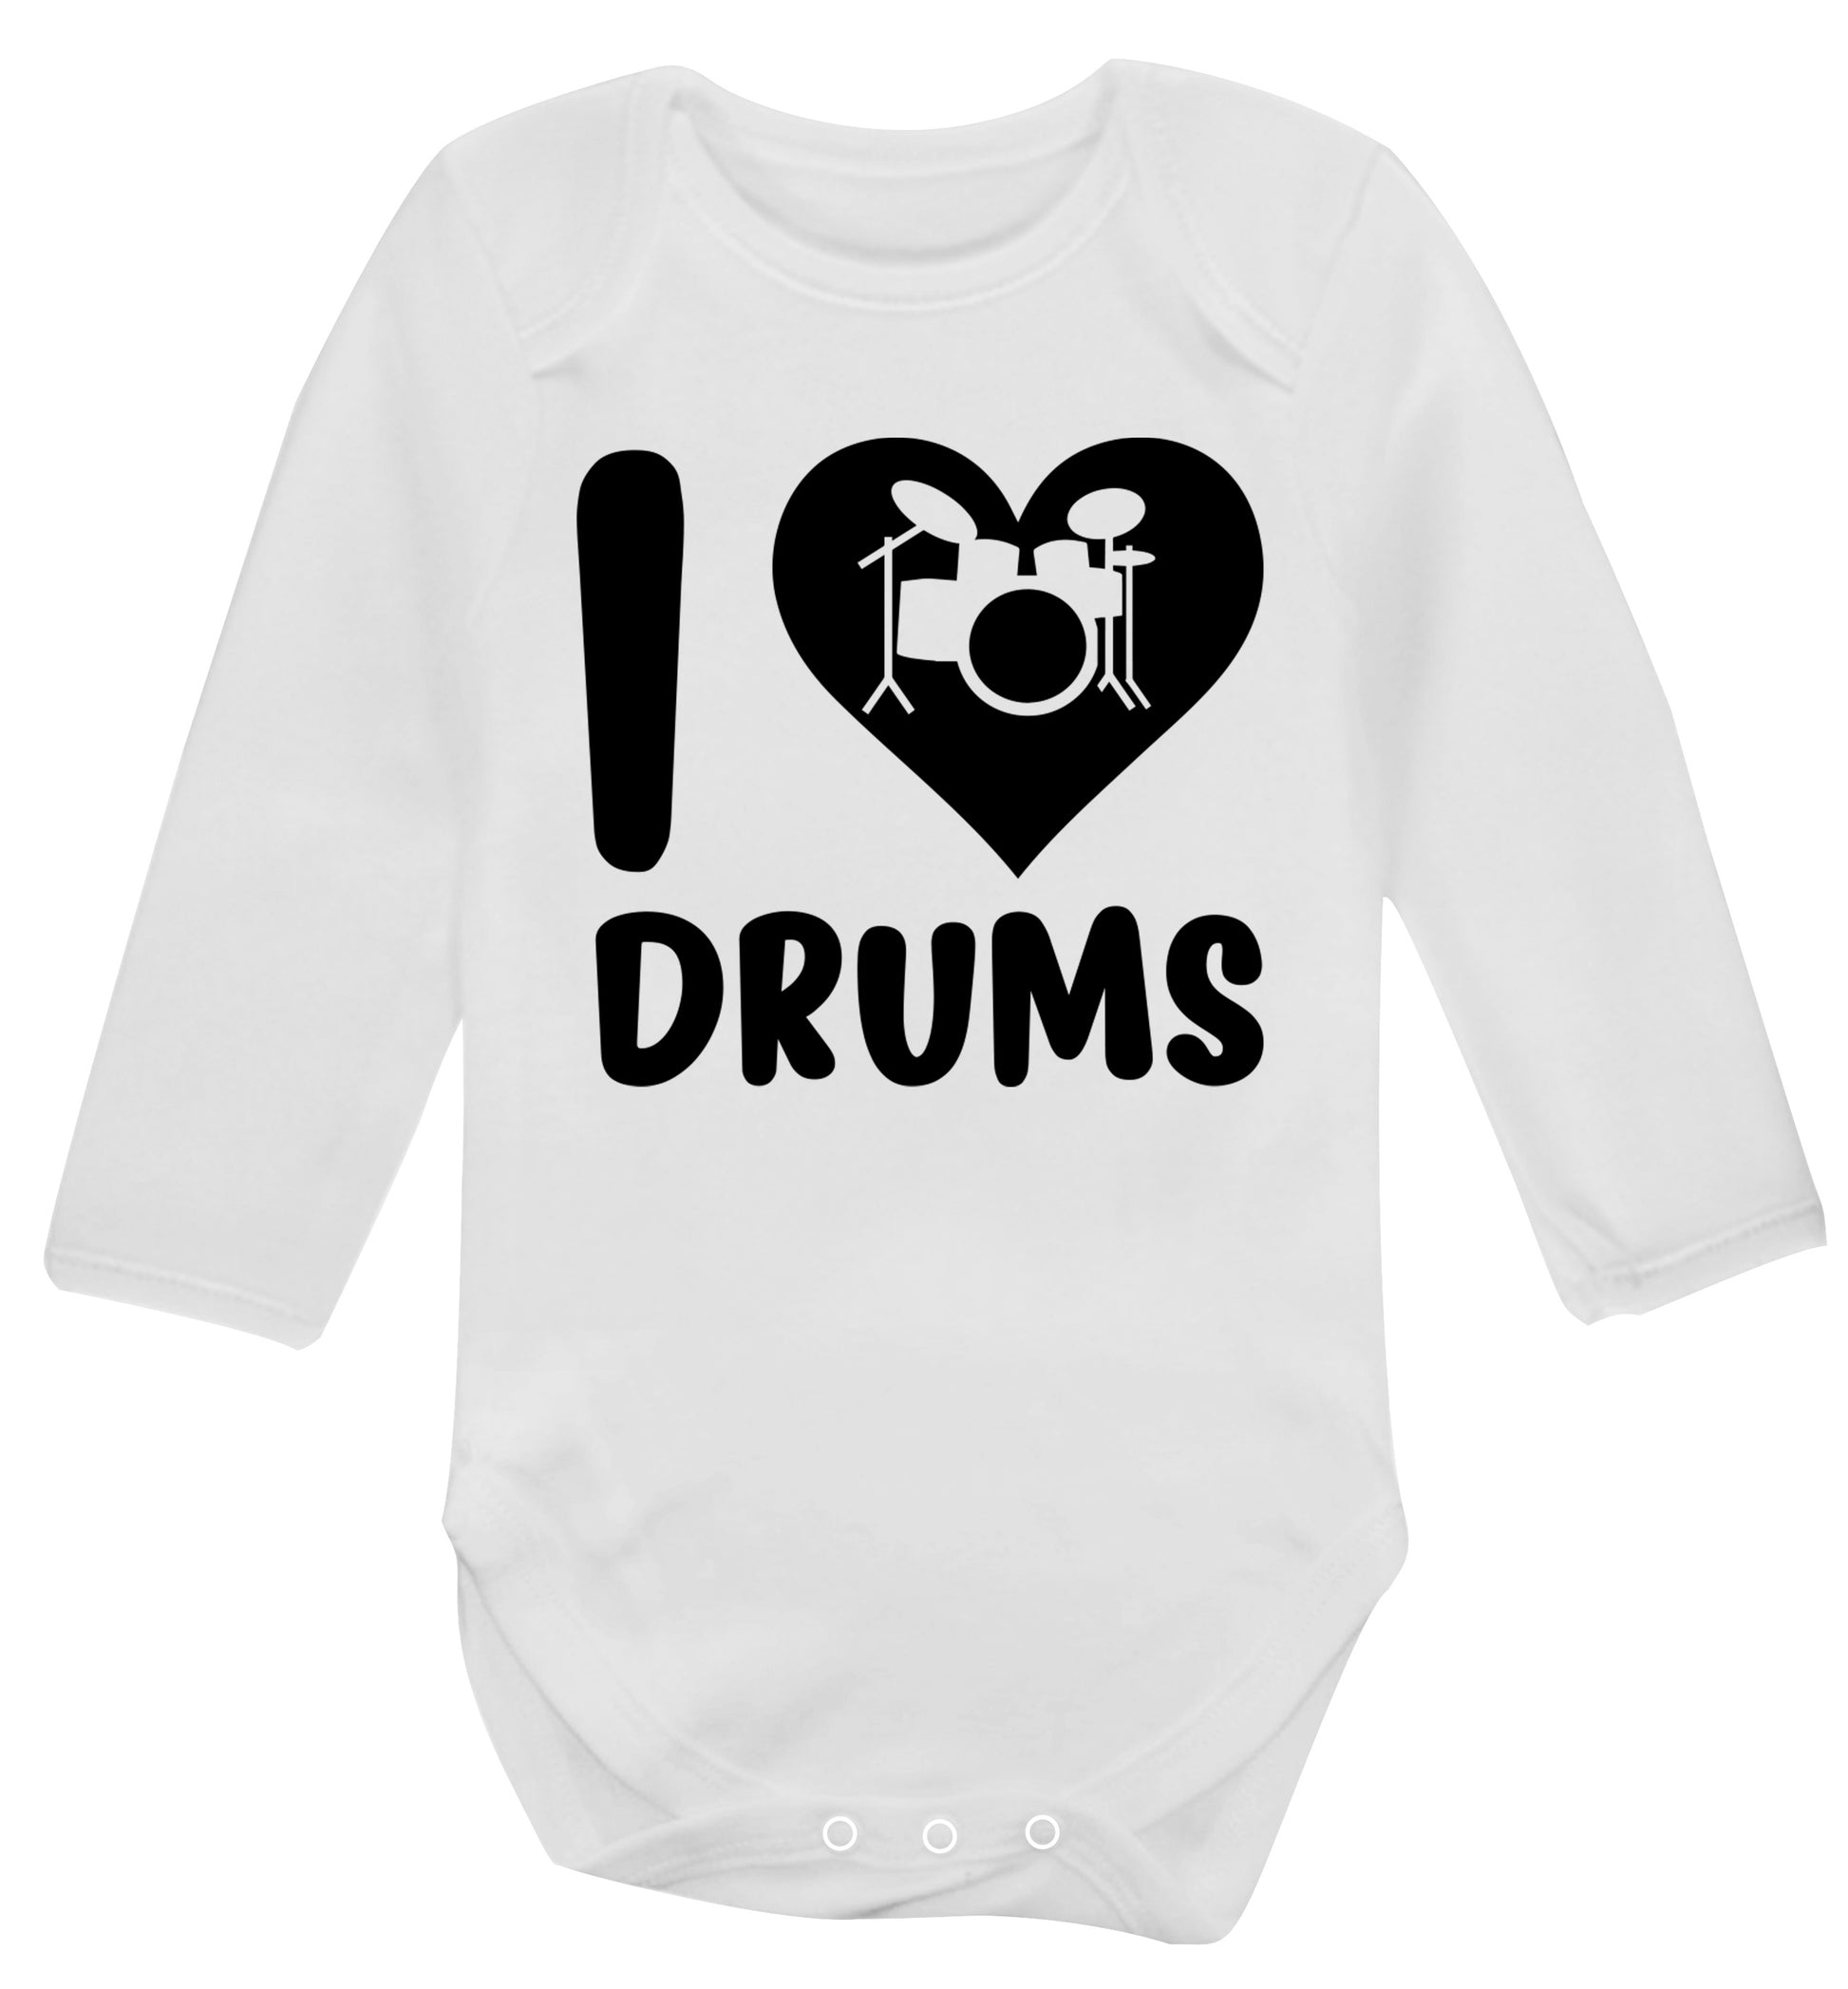 I love drums Baby Vest long sleeved white 6-12 months